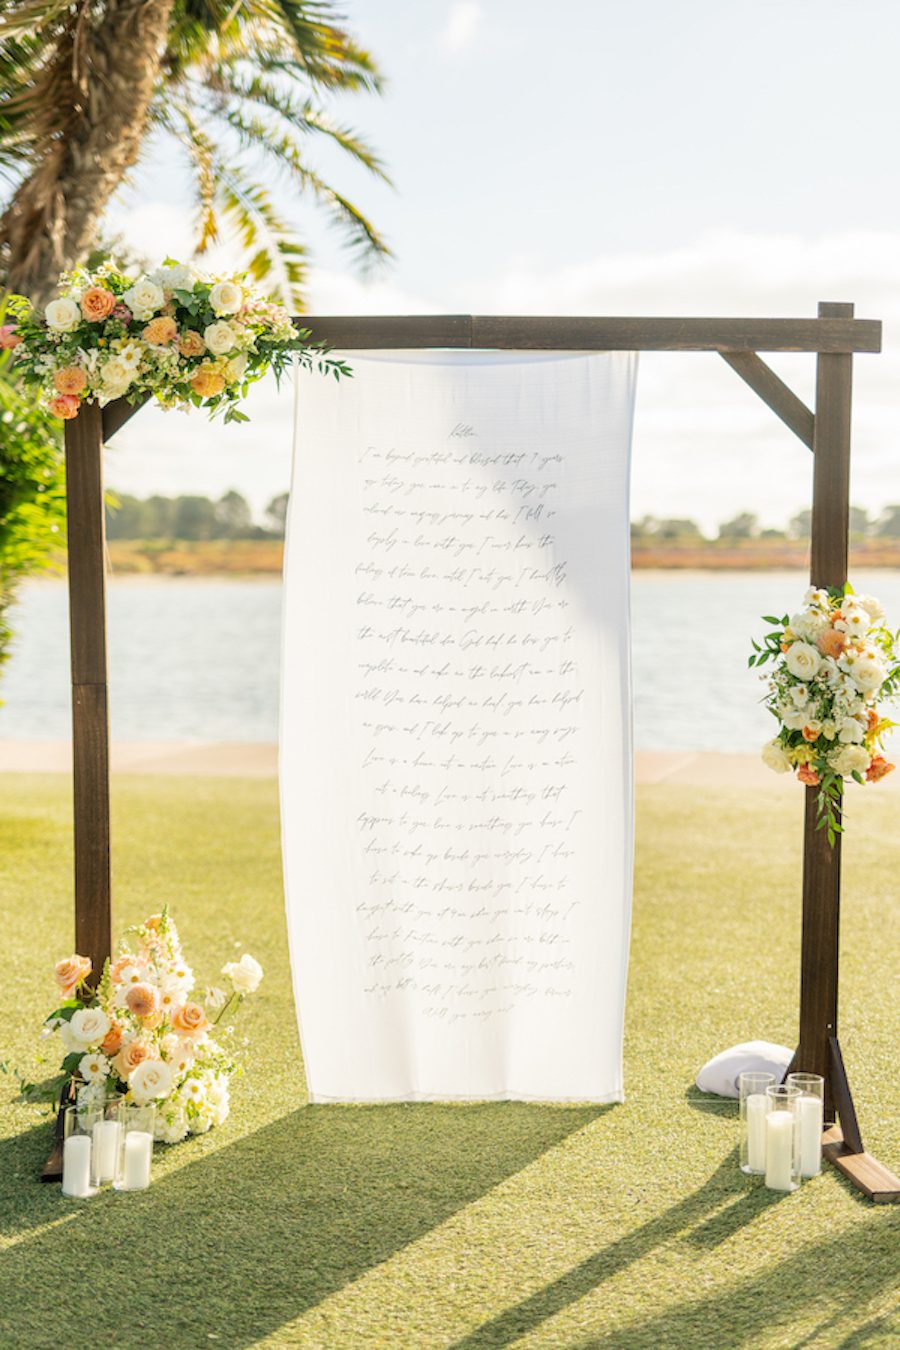 Mission Bay Resort, water front proposal. Romantic San Diego CA proposal details. Proposal speech tapestry. Forever station words of affirmation. Custom tapestry backdrop